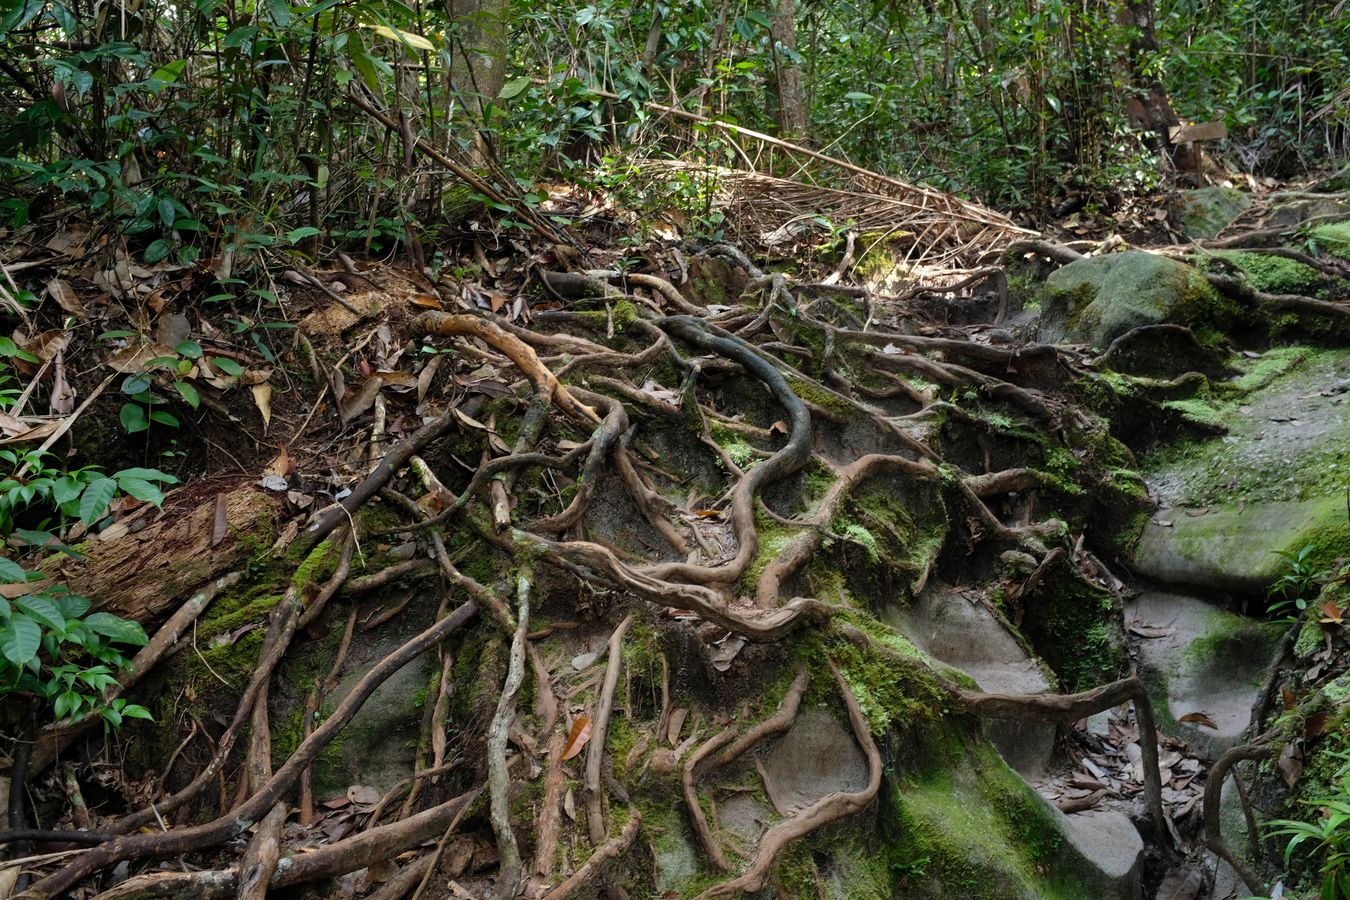 Tree Roots in the Mixed Dipterocarps Forest